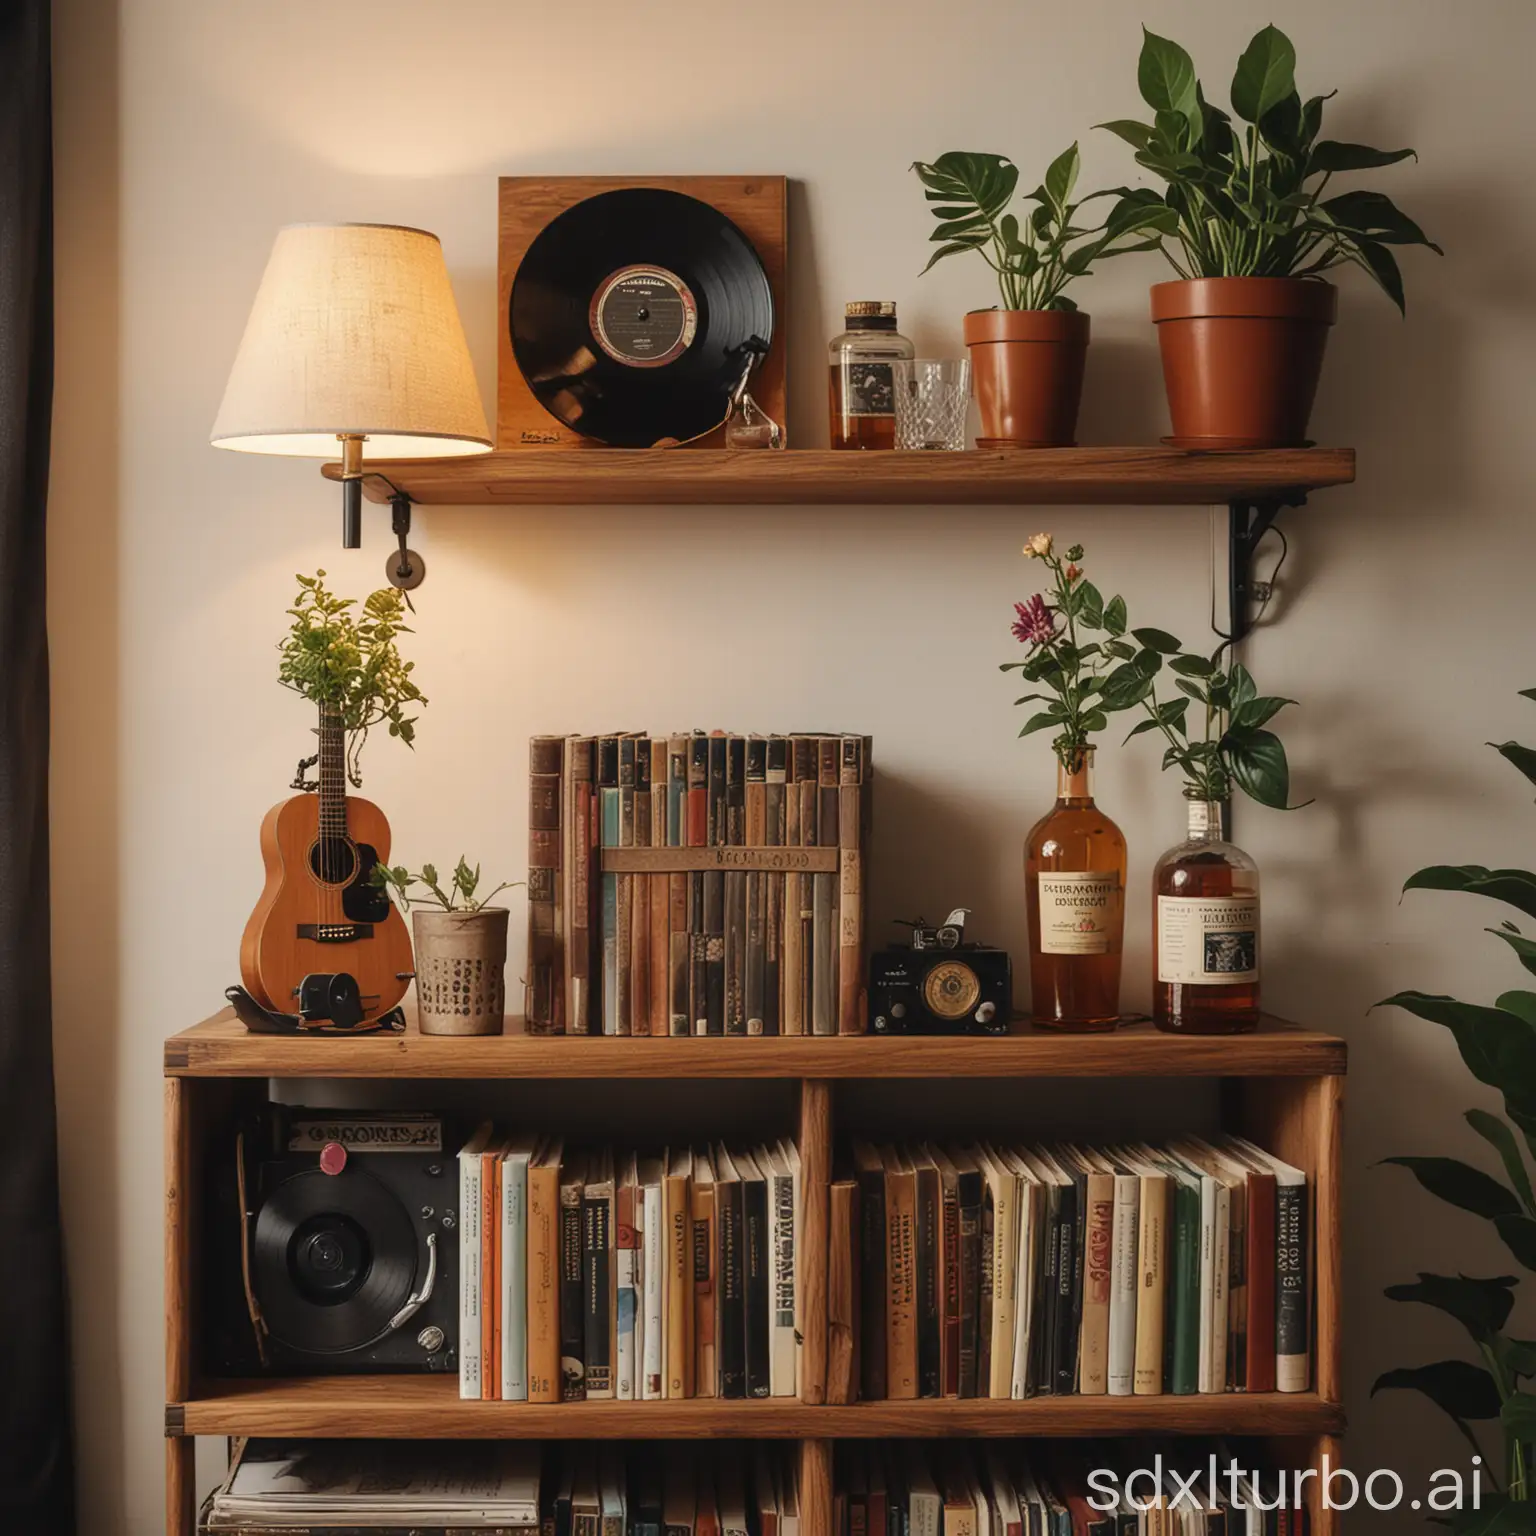 A wooden shelf with books, whiskey bottles, two glass glasses, an acoustic guitar, vintage record player, records, a lamp, a plant without flower